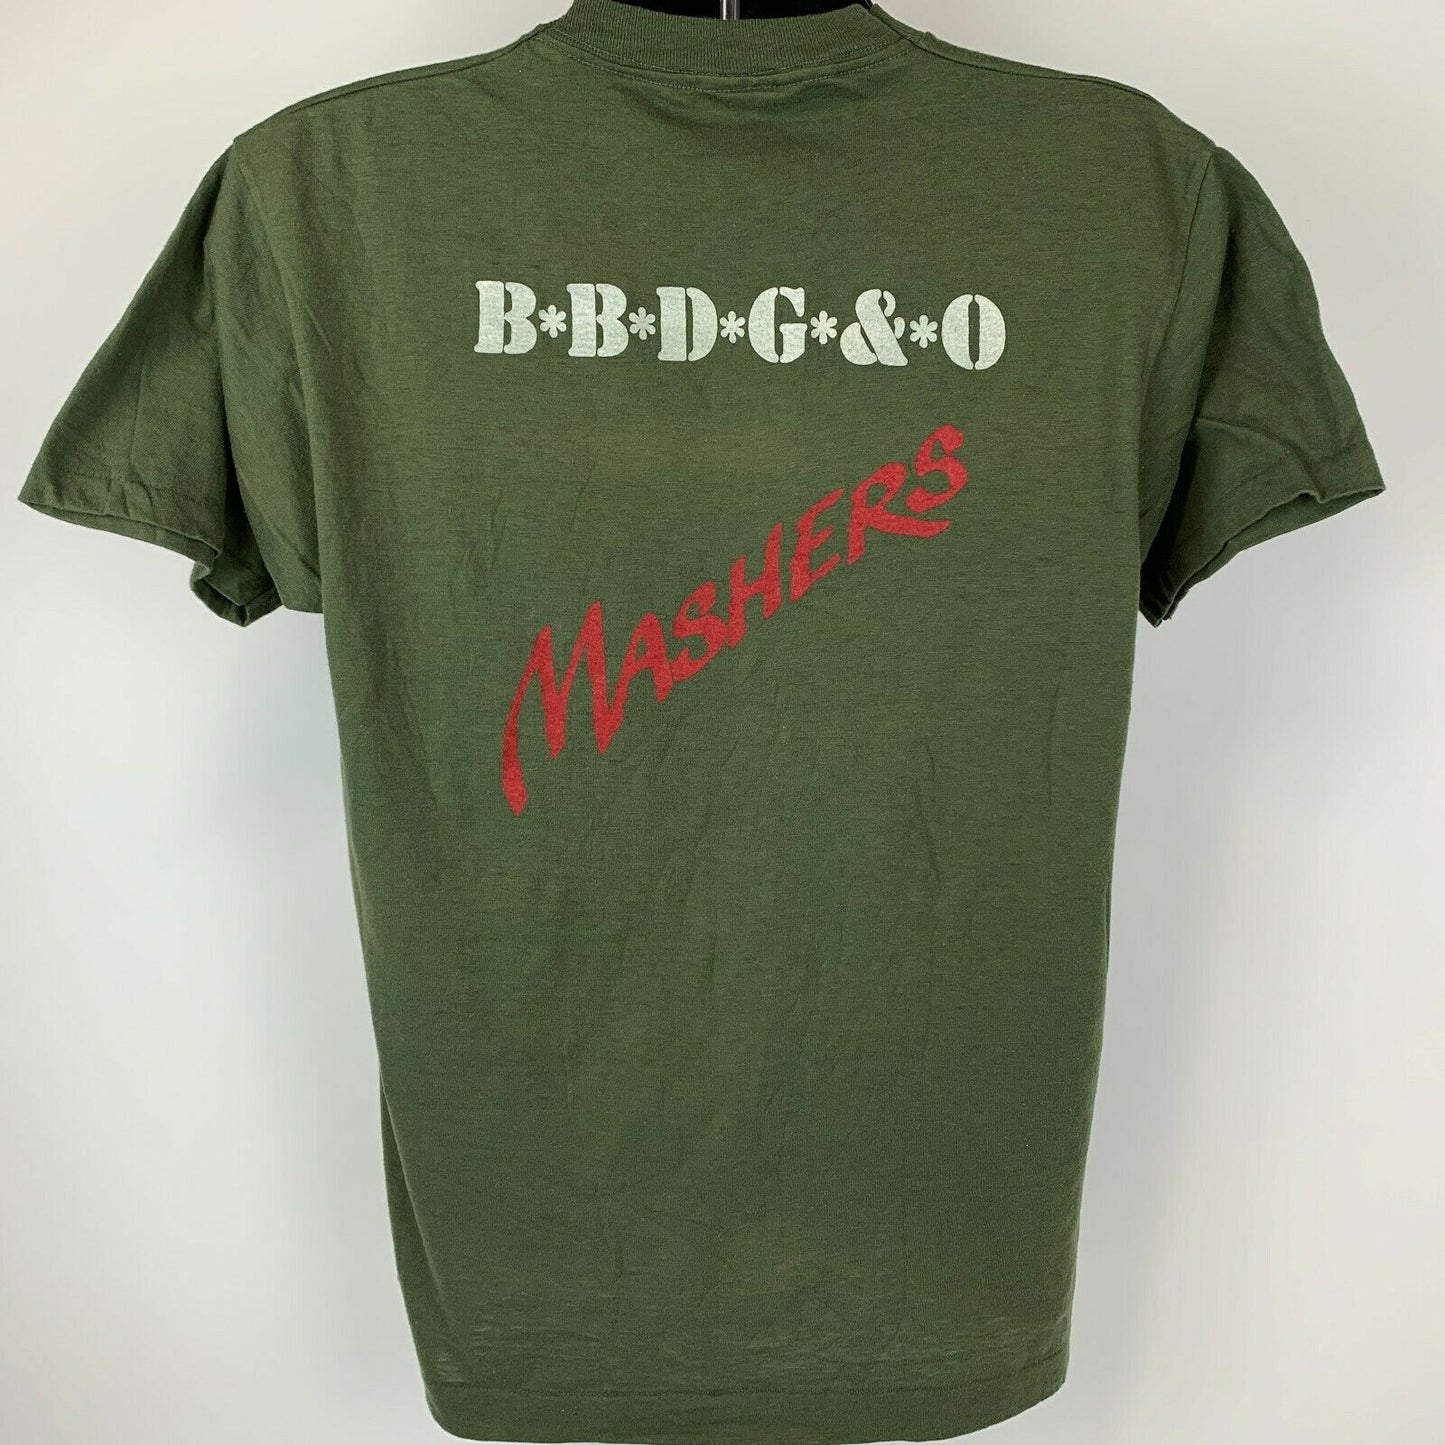 Vintage 1980s MASHERS Large T Shirt Five Star General BBDG&O Made In USA Tee